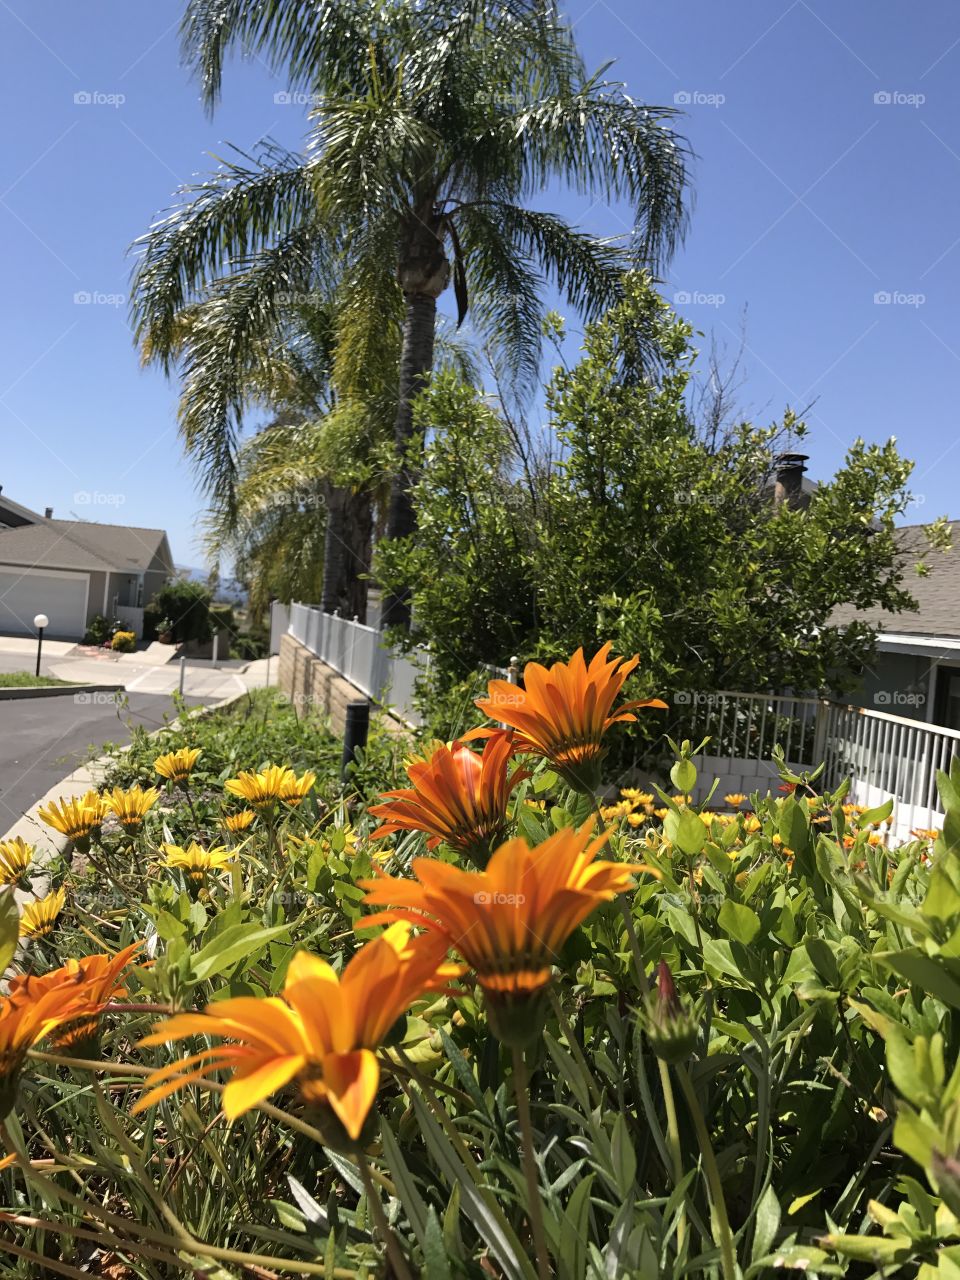 Palm trees and wildflowers